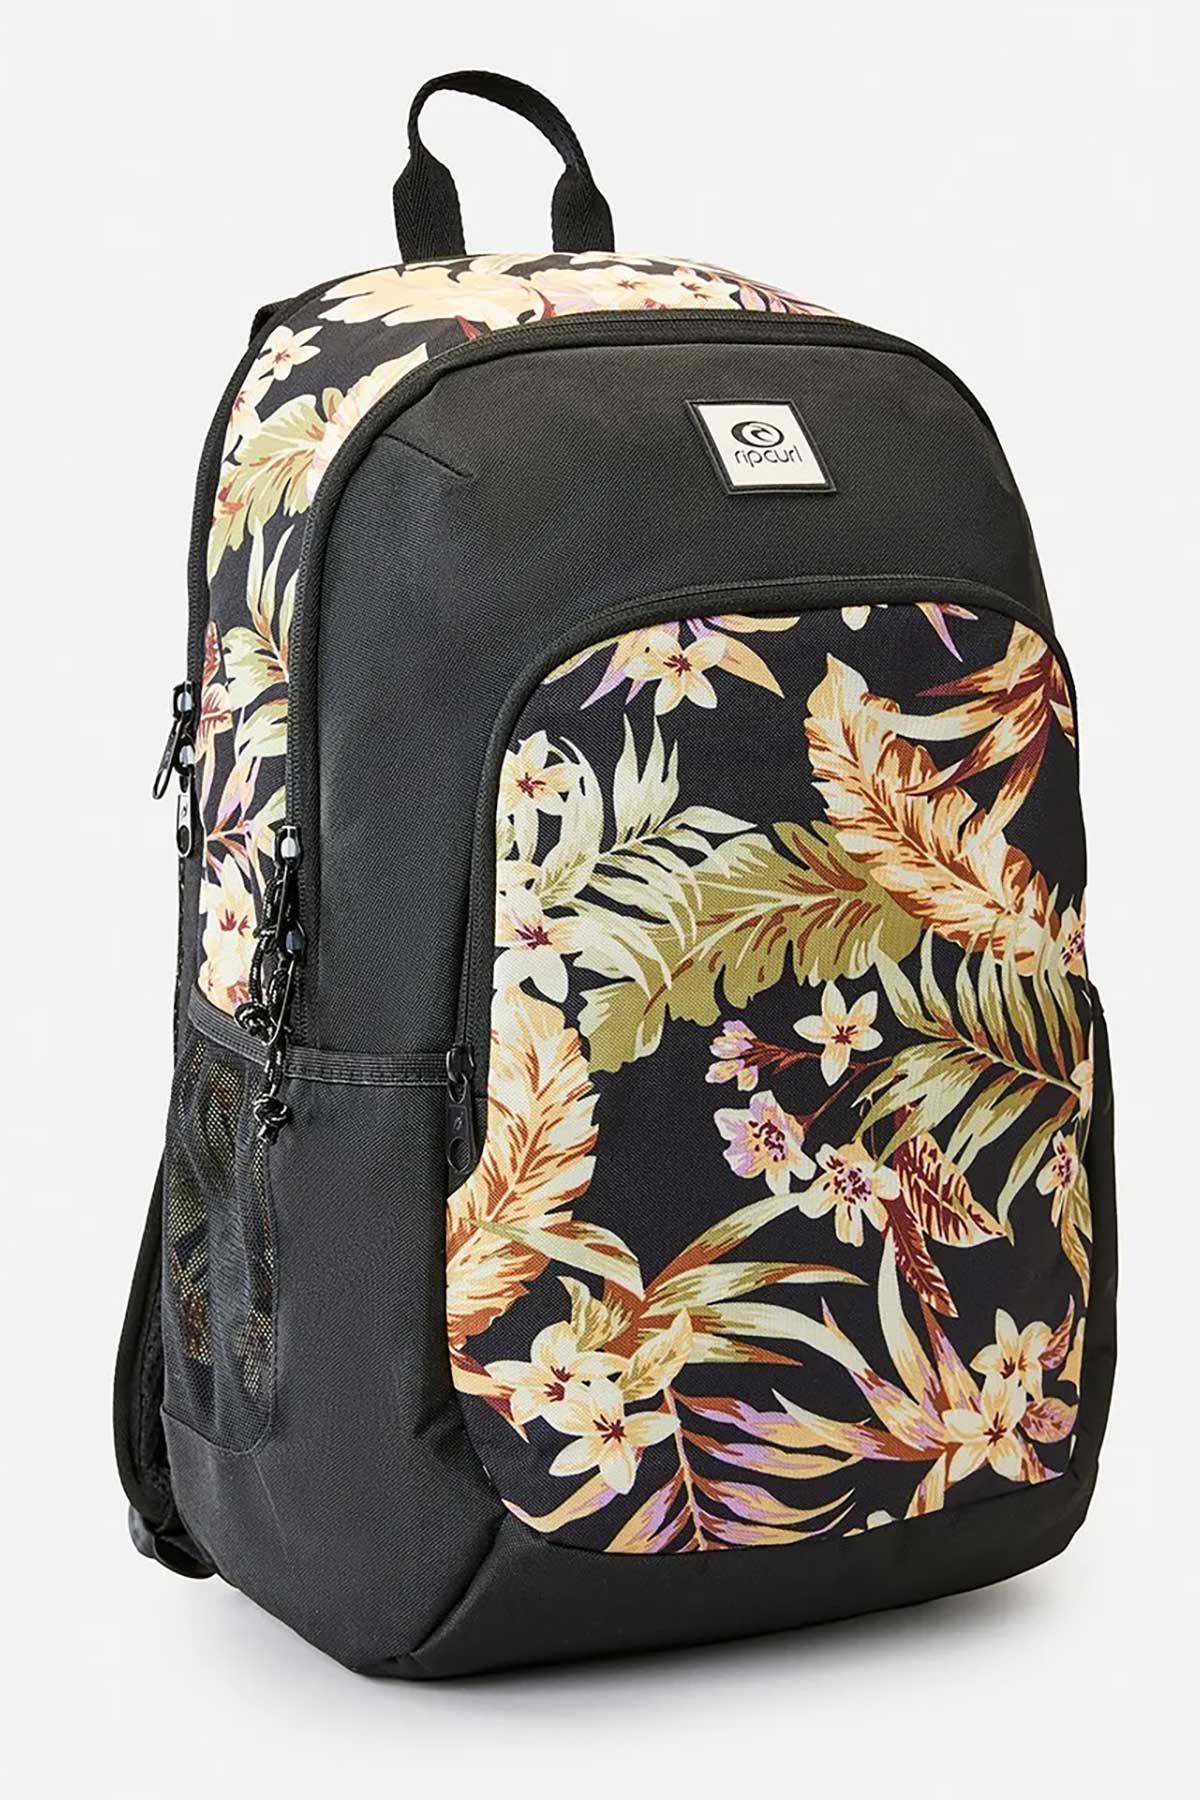 Rip Curl Backpack - Ozone 2.0 30 L black front 3/4 view